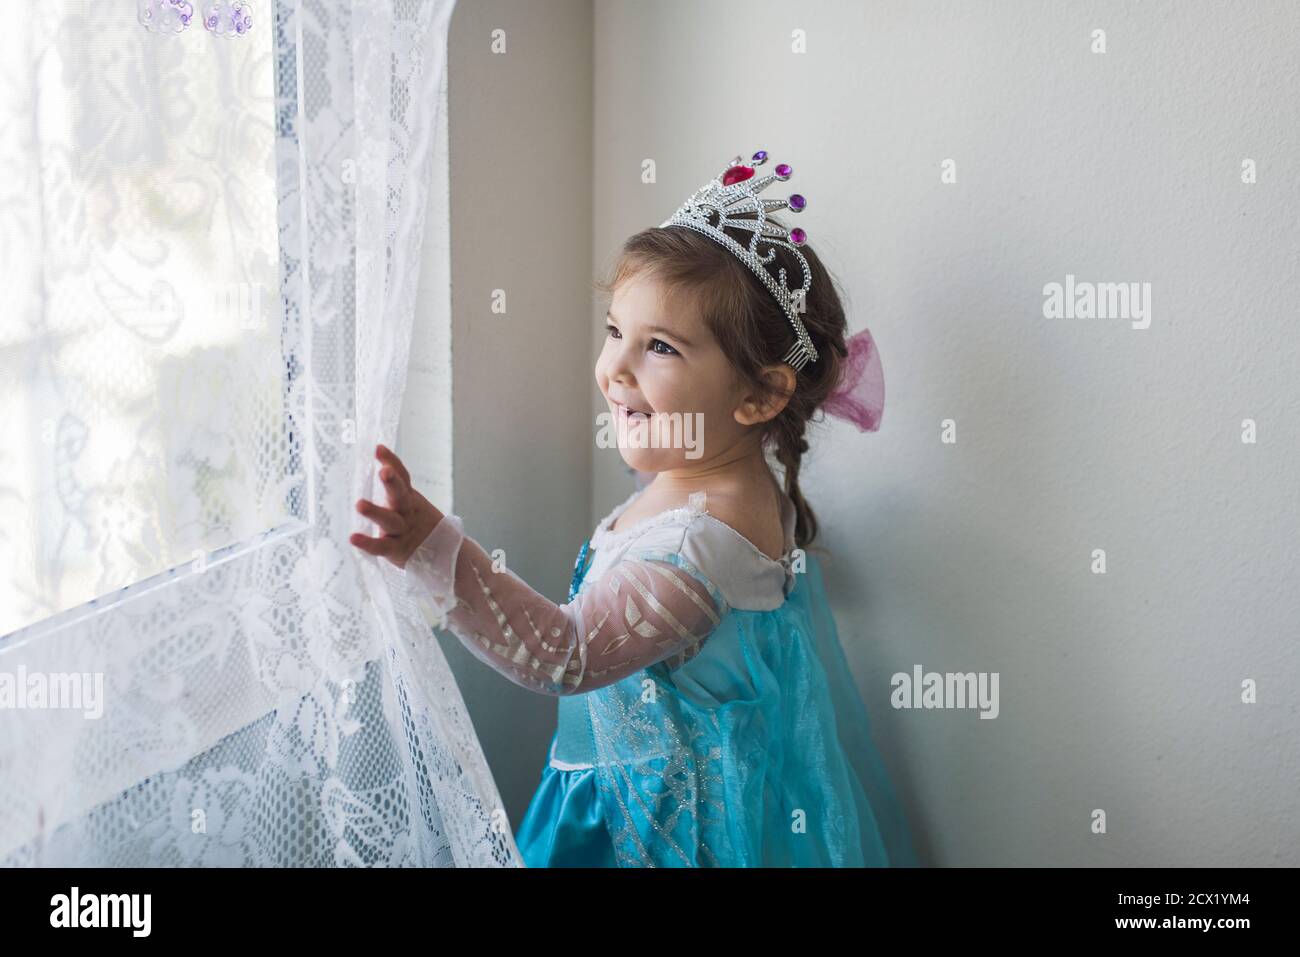 Smiling girl in princess costume and tiara touching white lace curtain Stock Photo